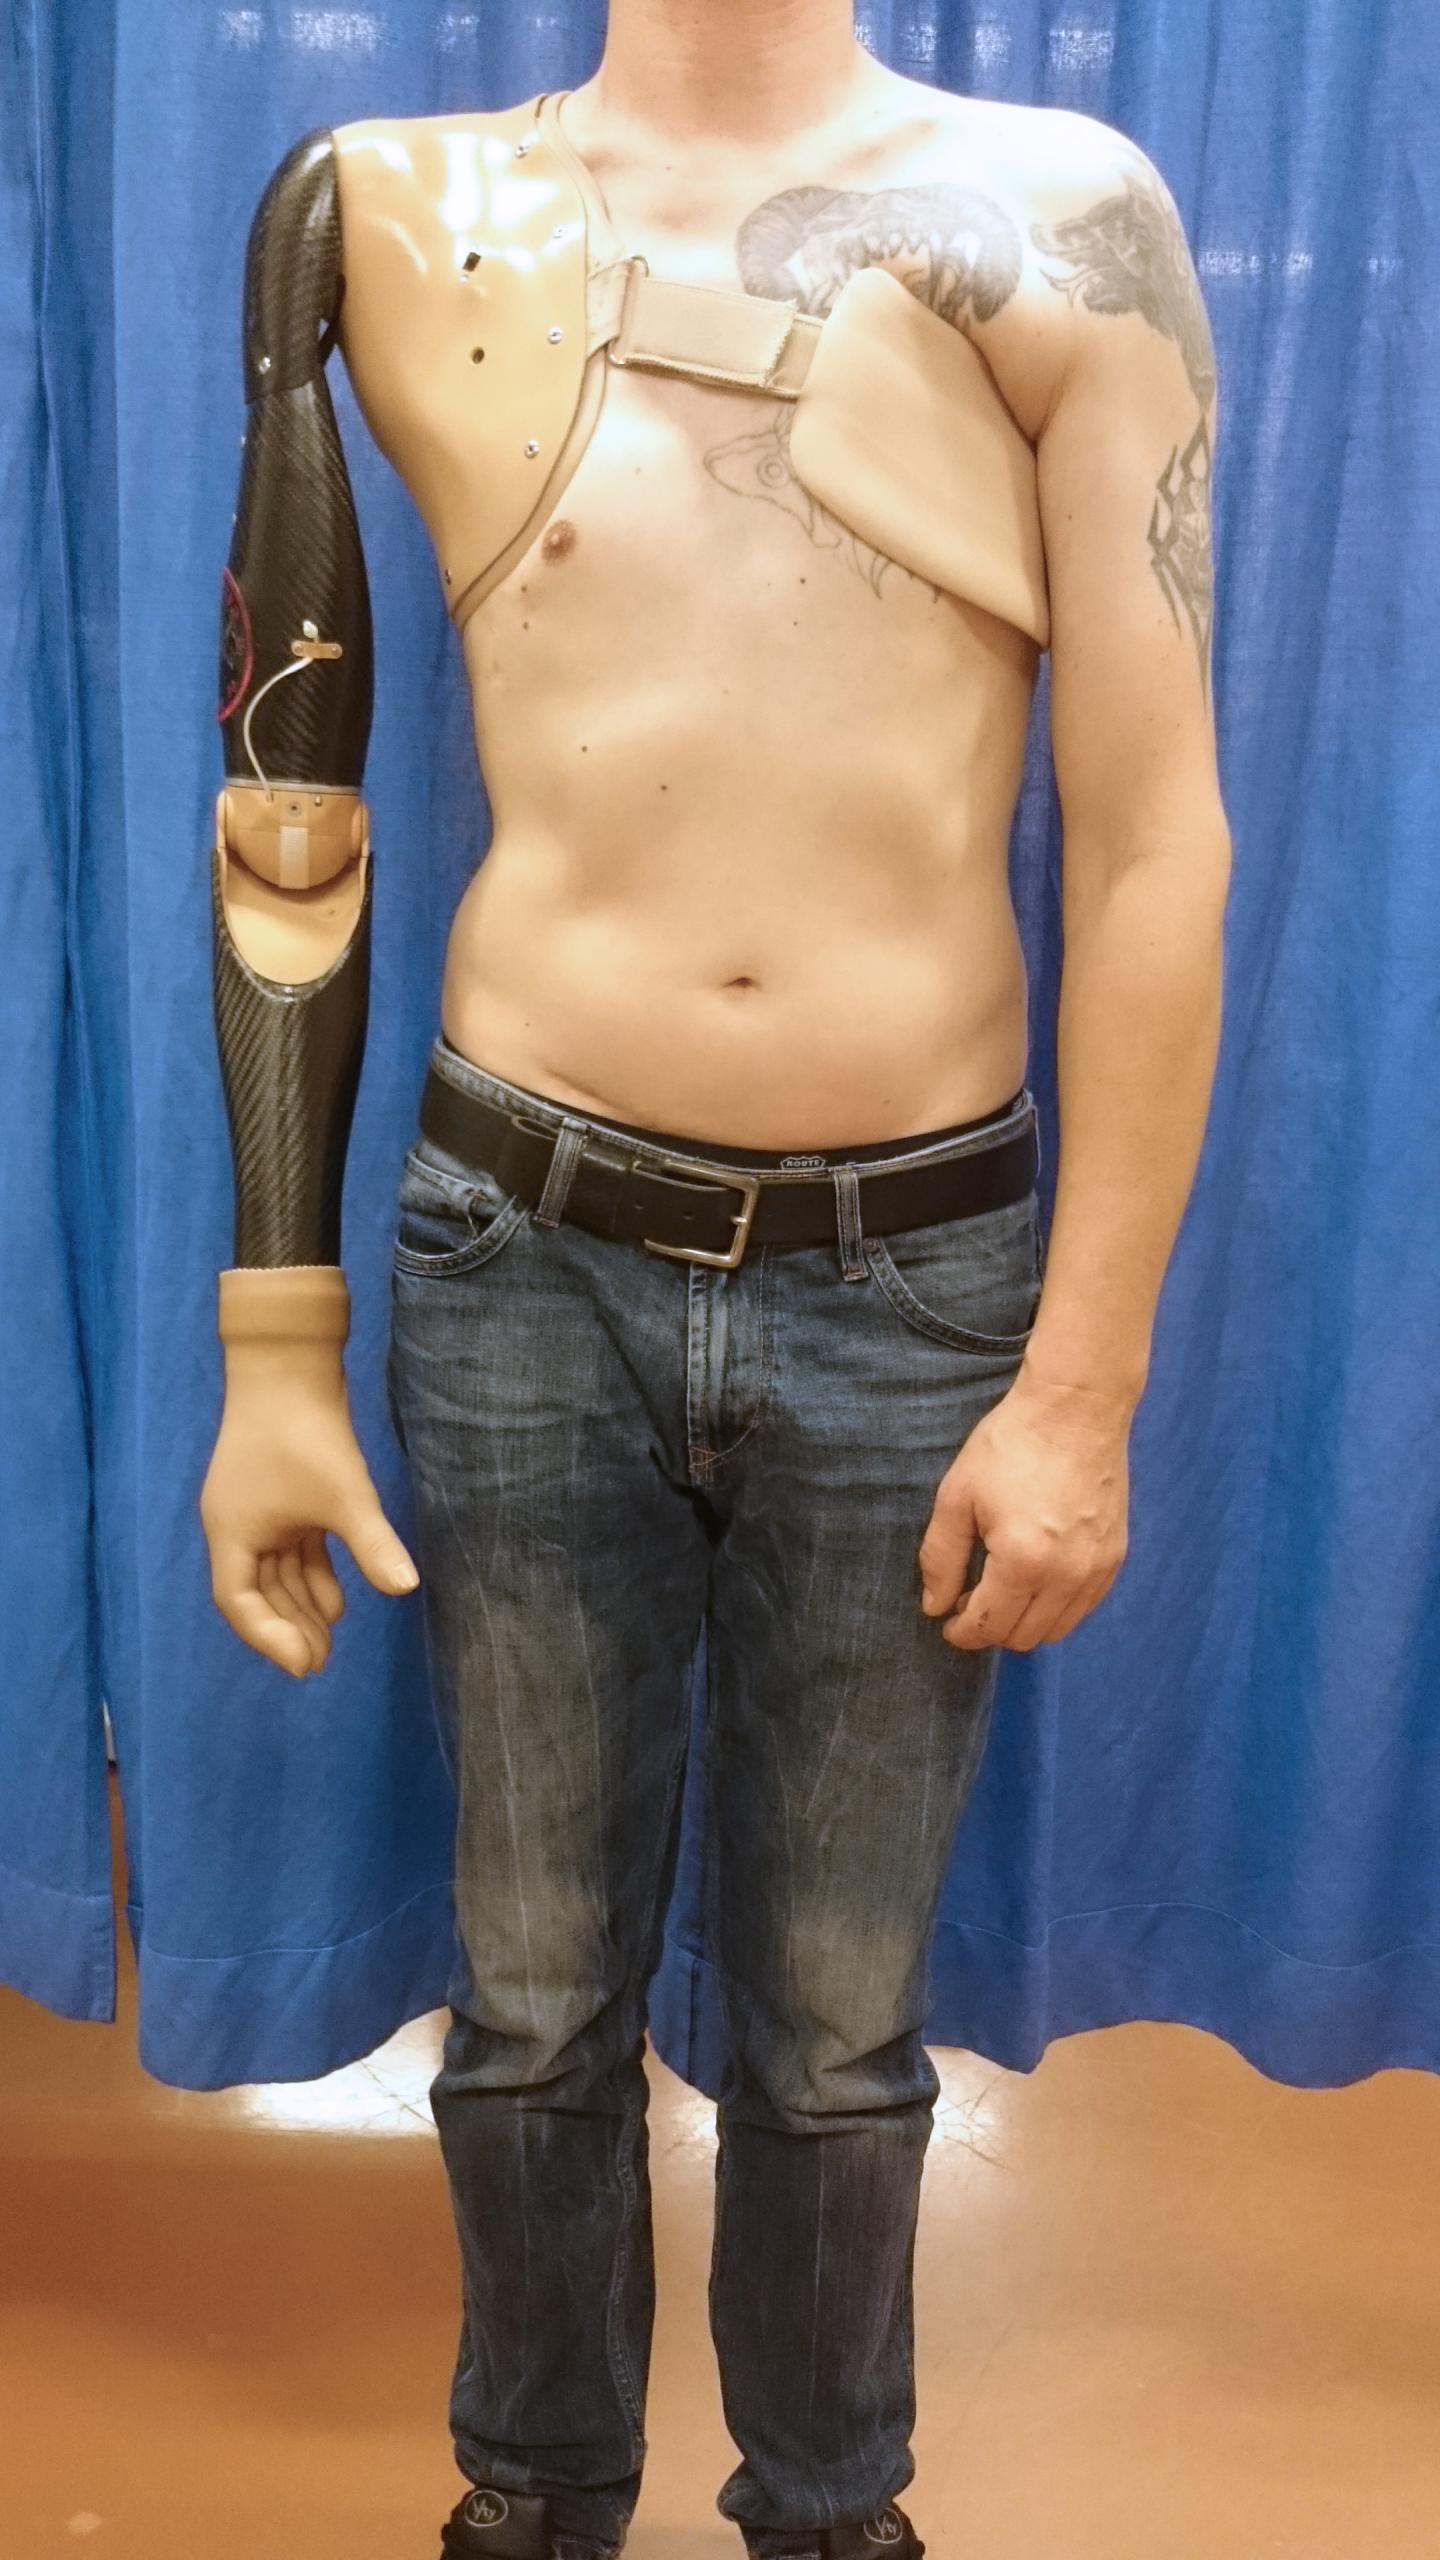 Prosthetic Technology in the Study